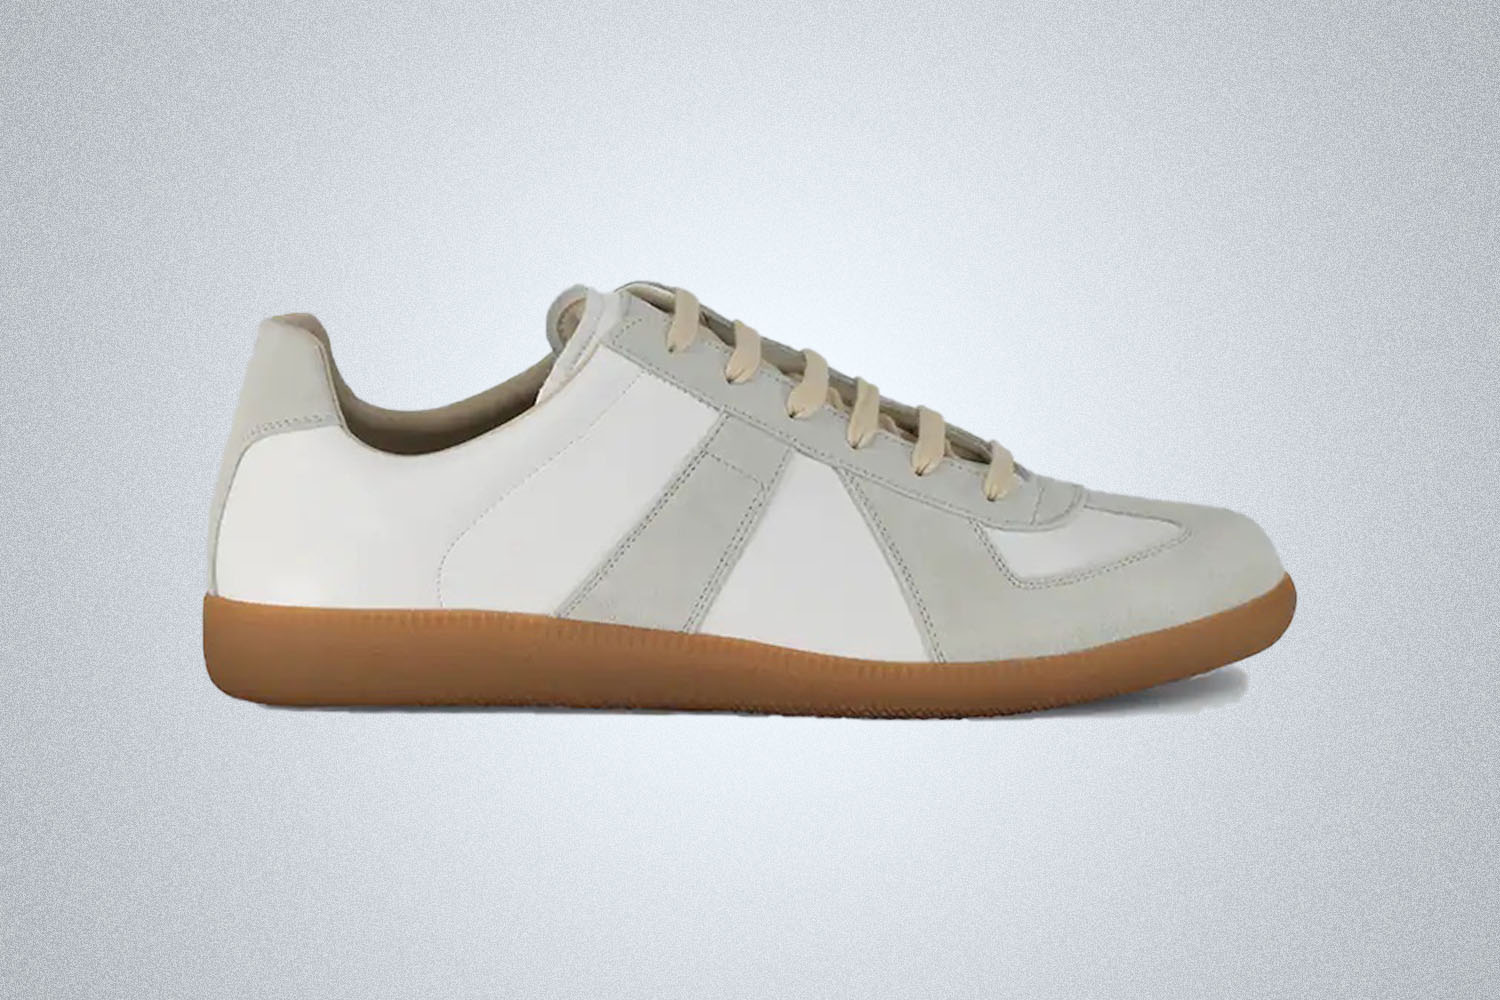 A pair of replica trainers from Maison Margiela on a grey background